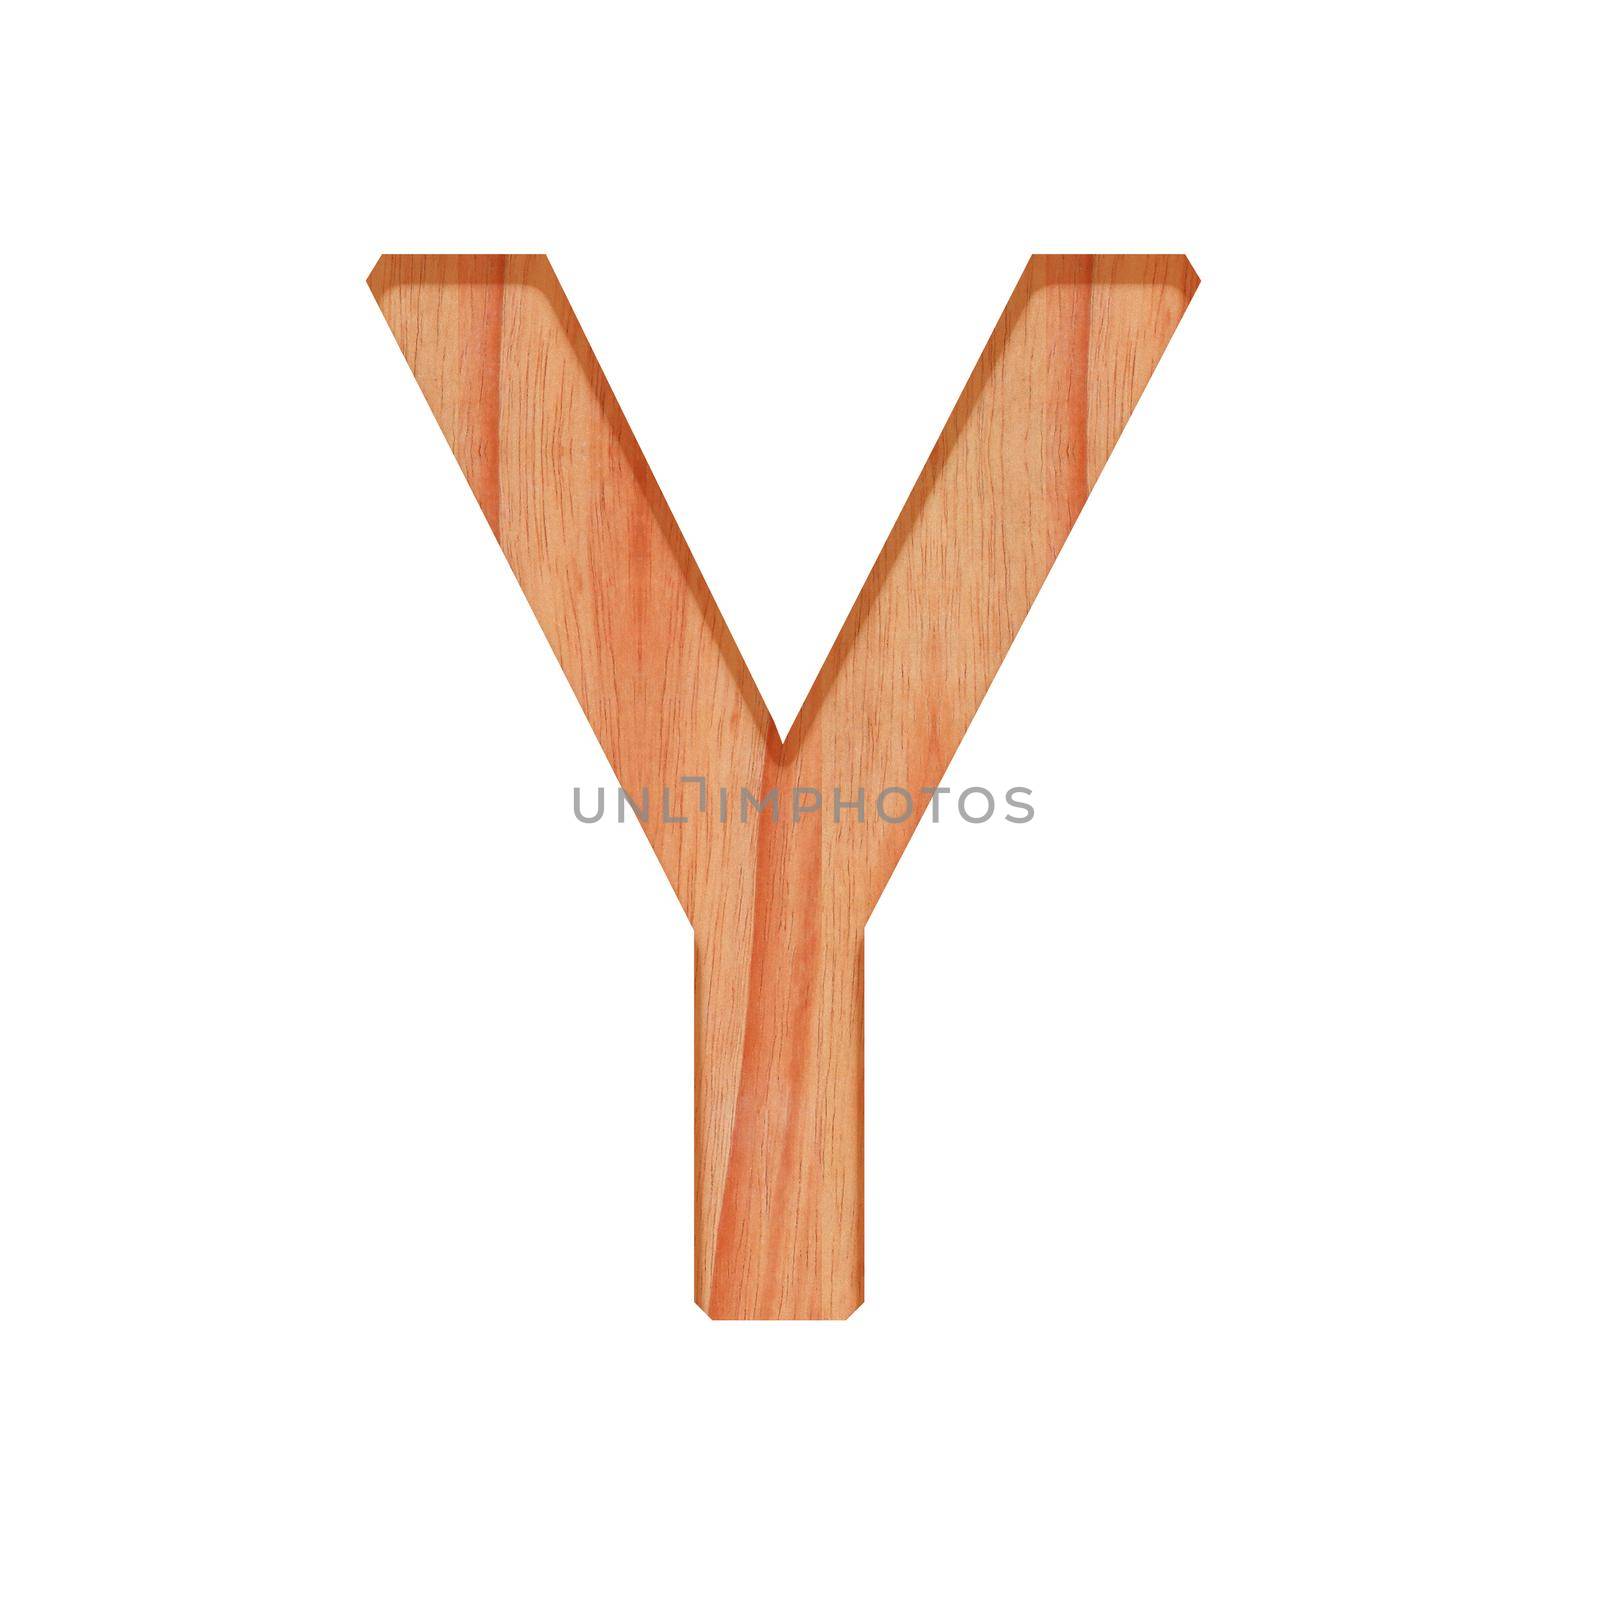 wooden letter pattern beautiful 3d isolated on white background, design alphabet Y